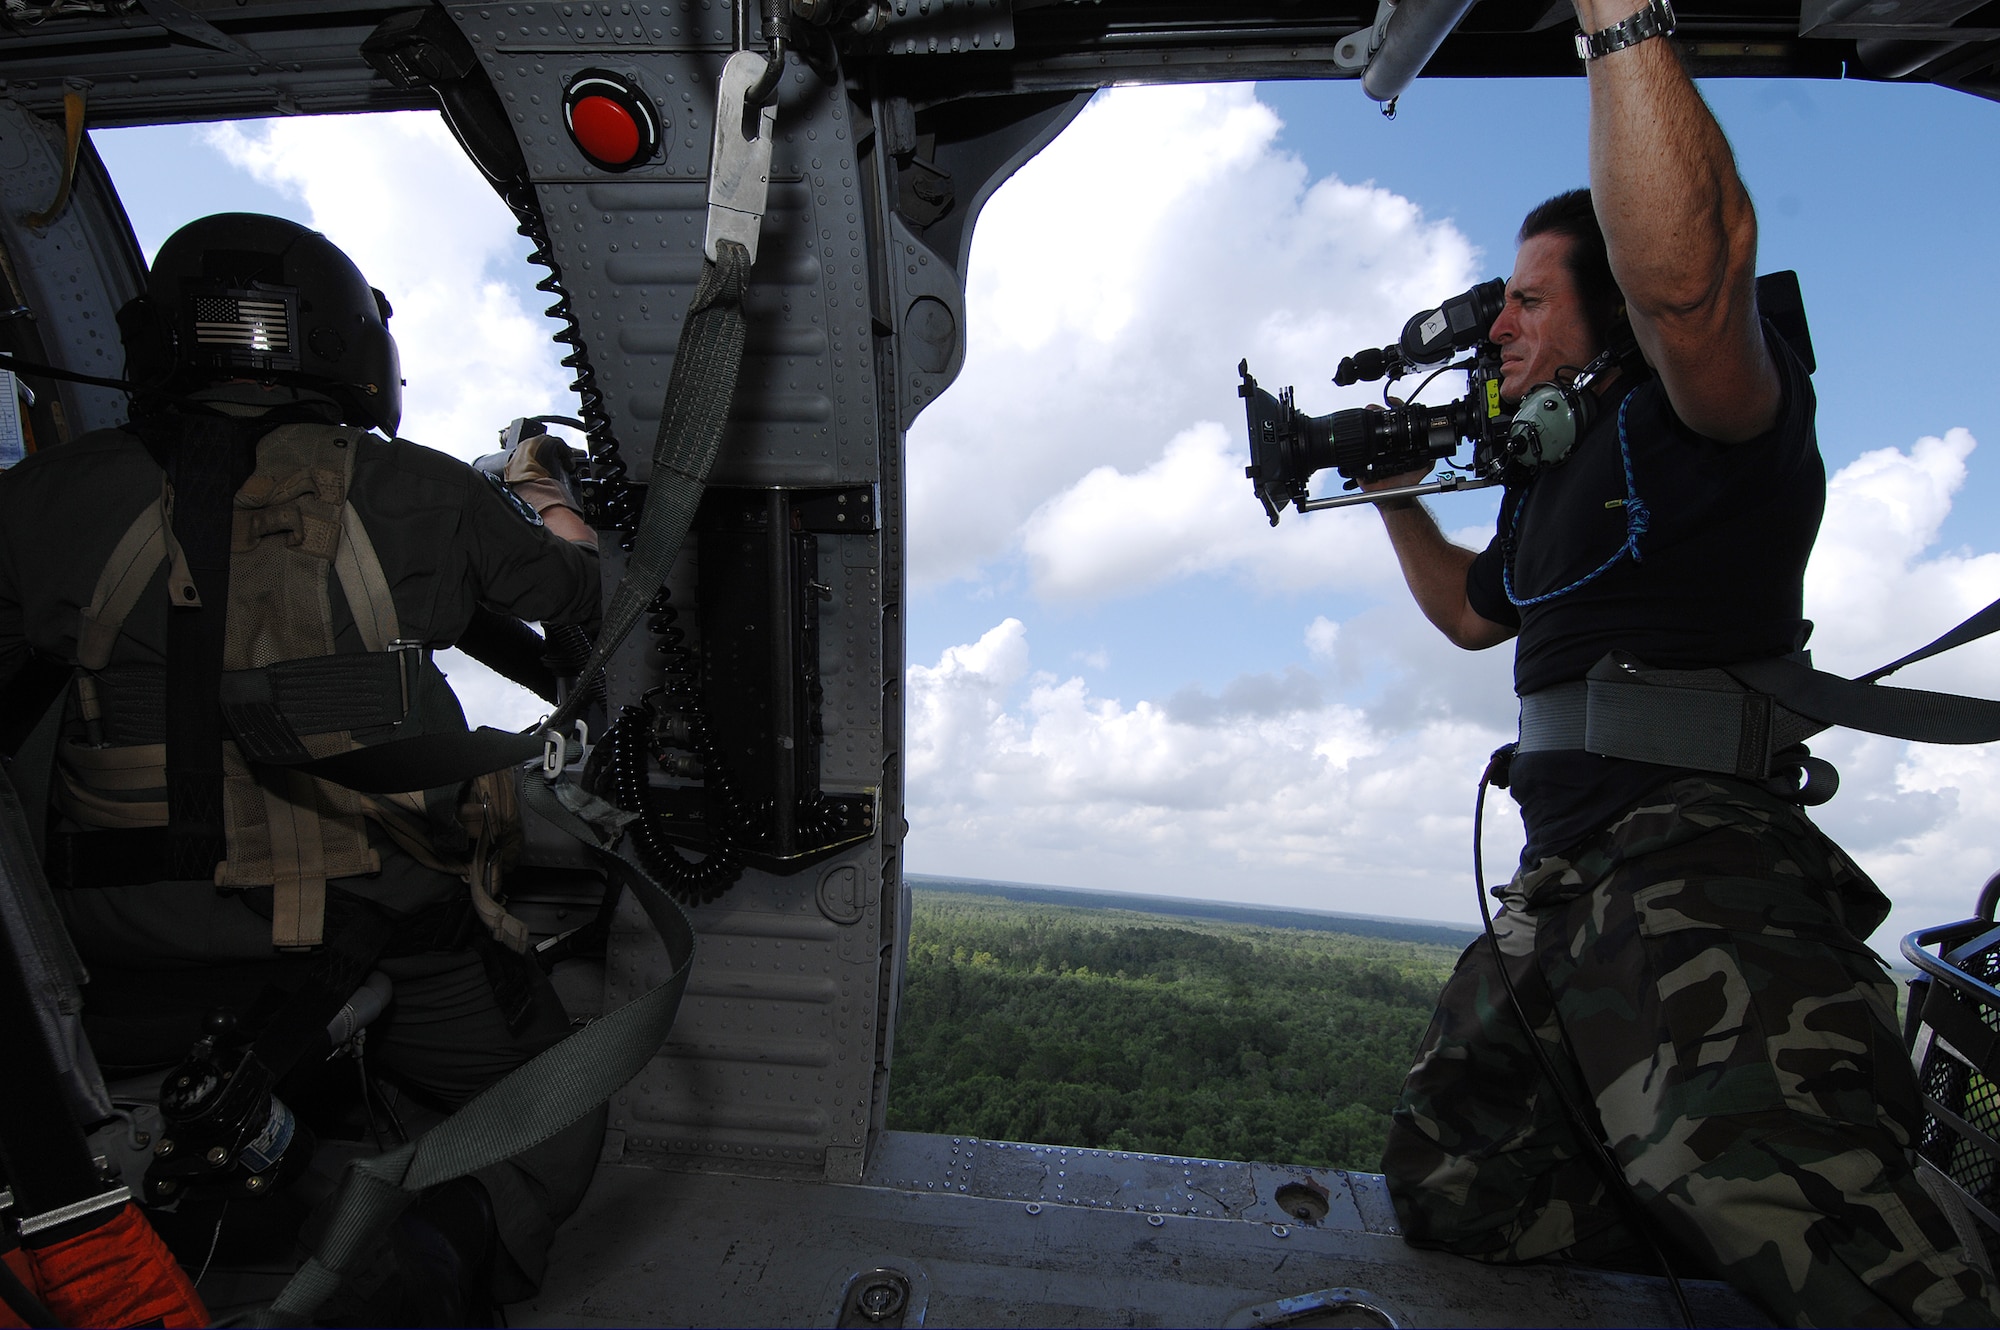 Jodi Miller, a commercial cinematographer with Bandito Brothers Films, videotapes Tech. Sgt. Joel Herbert, 41st Rescue Squadron flight engineer, firing his GAU-2 minigun from an HH-60G Pave Hawk helicopter, June 27 in the skies above Moody Air Force Base, Ga. A video production company visited Moody to film a commercial for the U.S. Air Force recruiting campaign, "Do Something Amazing." (U.S. Air Force photo by Master Sgt. Scott Reed)